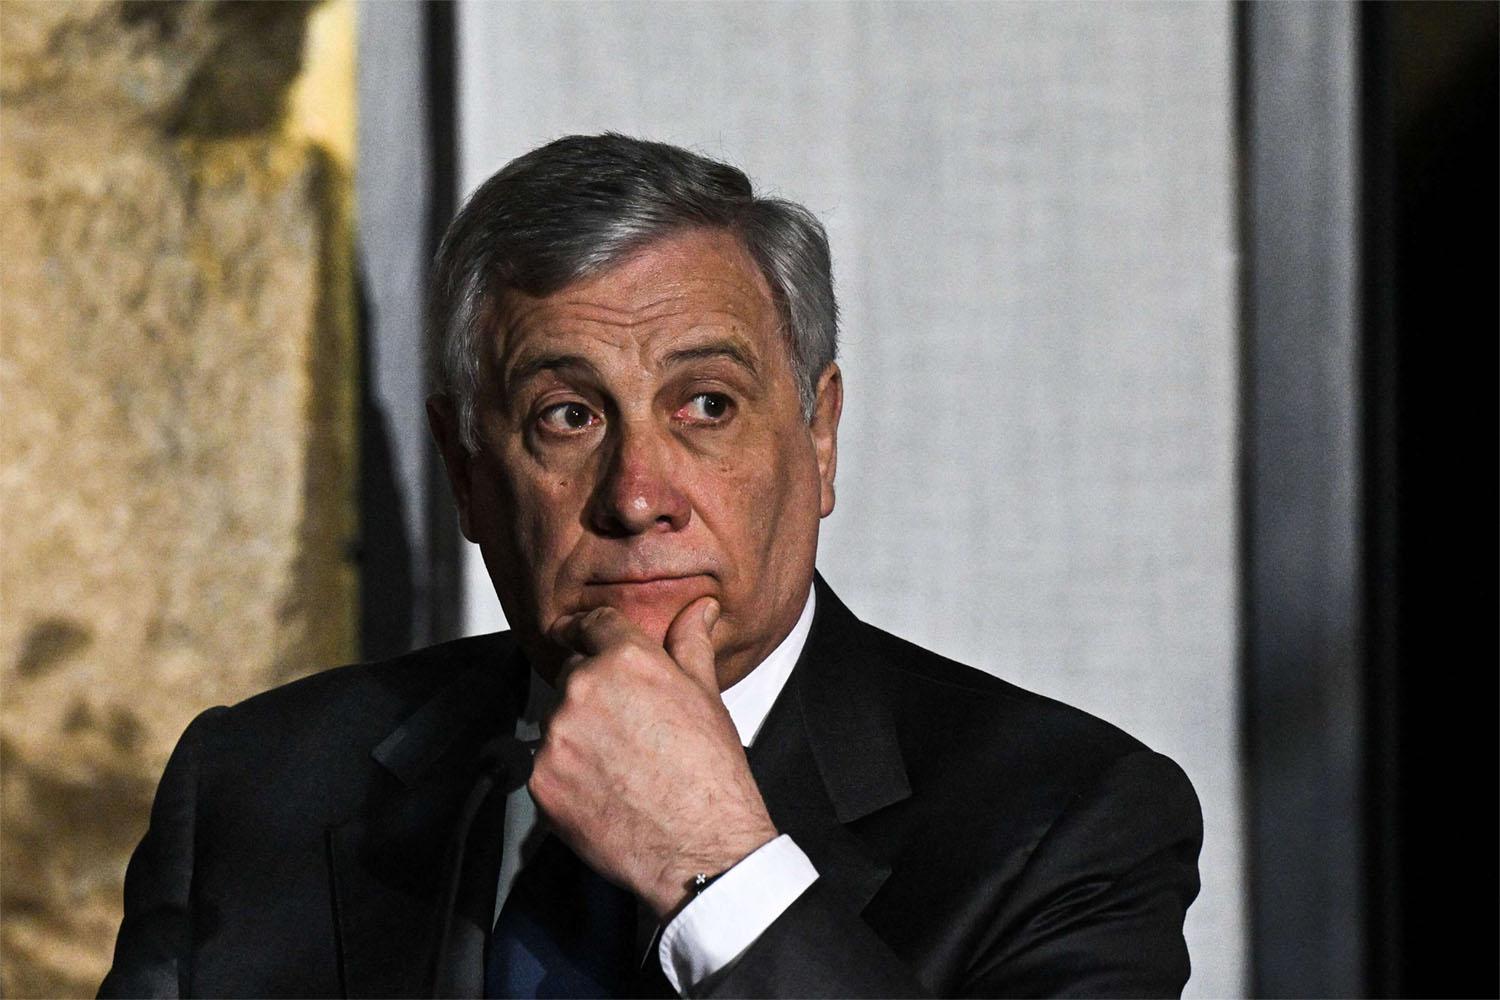 Italy's Deputy Prime Minister and Foreign Minister Antonio Tajani 